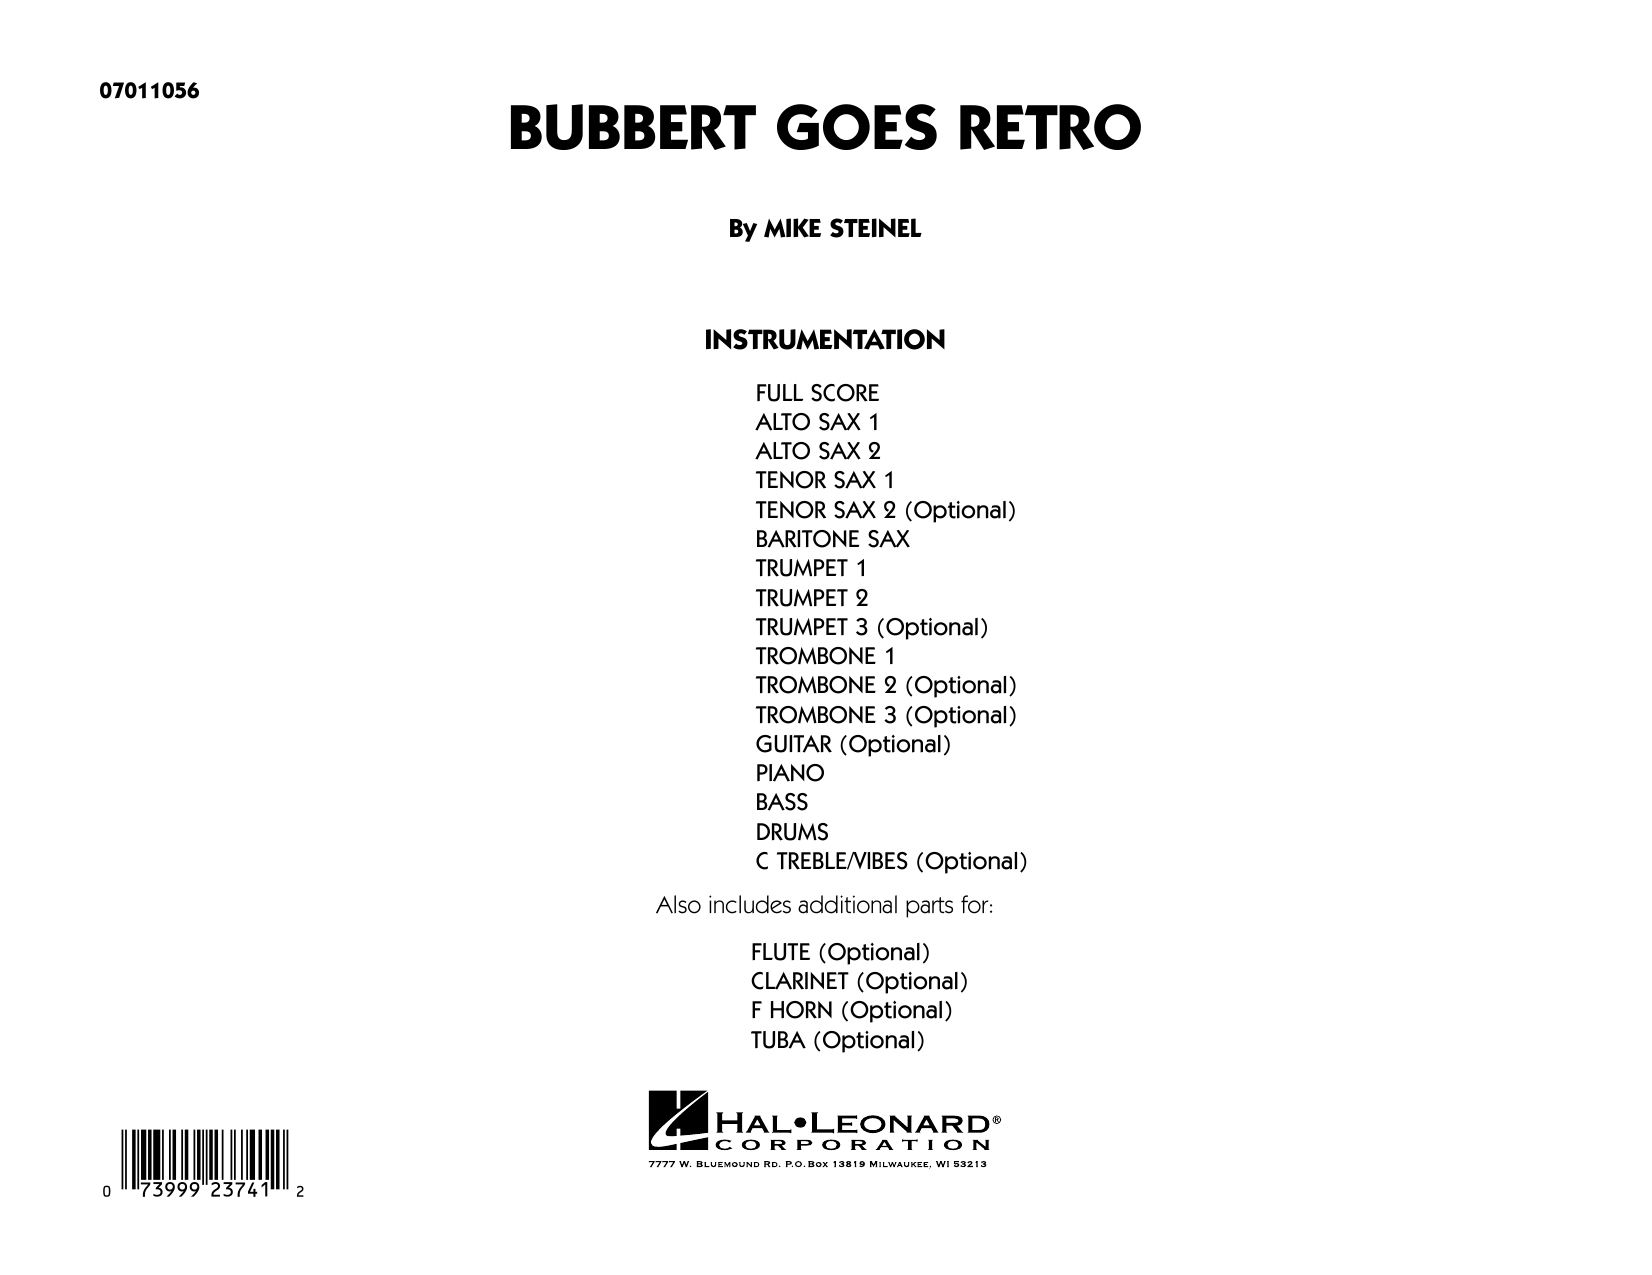 Mike Steinel Bubbert Goes Retro - Conductor Score (Full Score) sheet music notes and chords. Download Printable PDF.